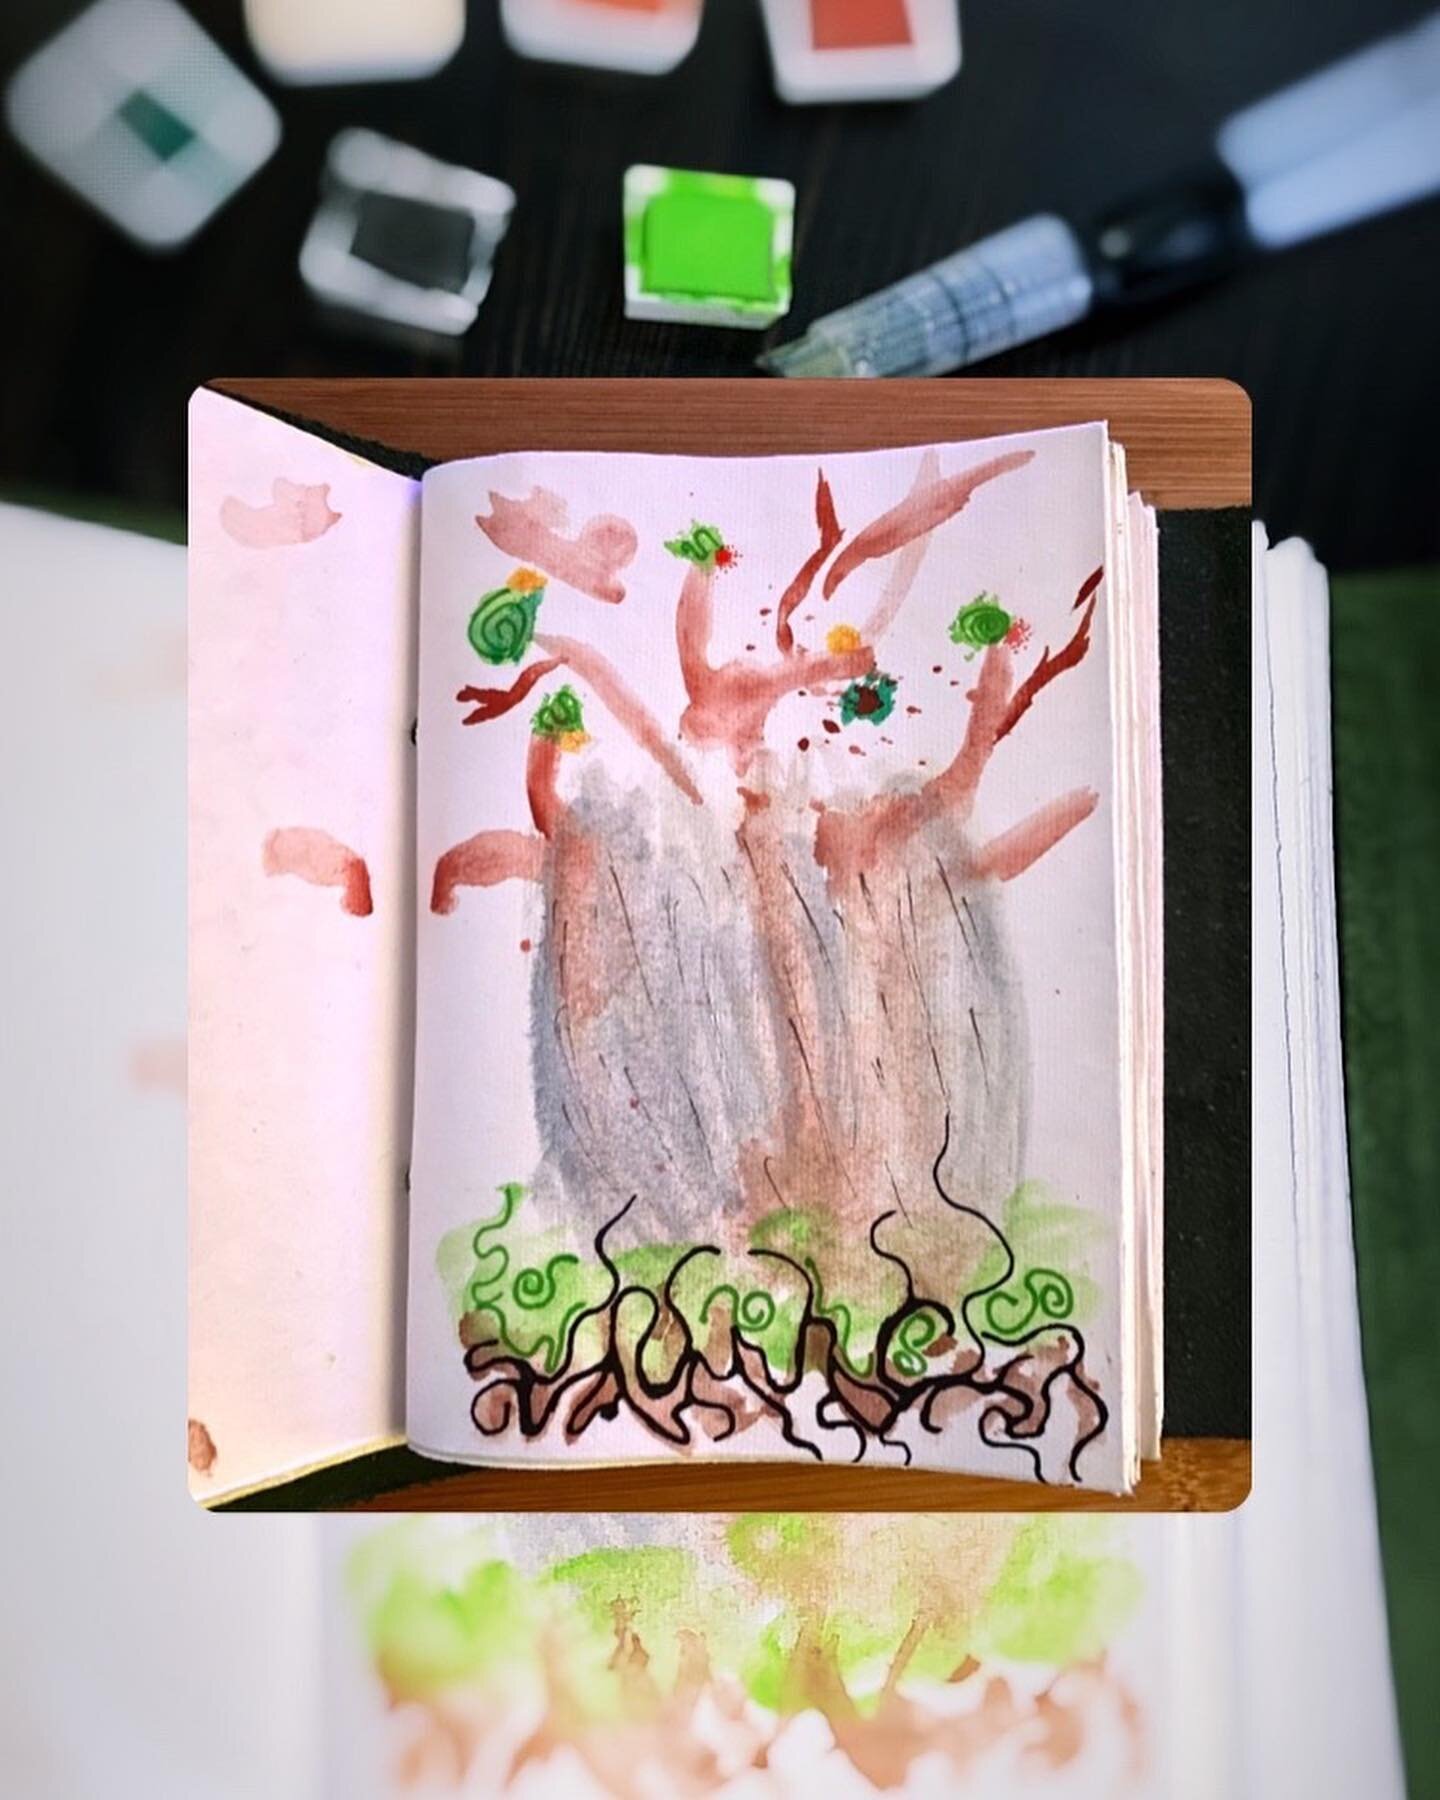 Often trees represent growth, connection, resilience, blooming and so much more.

Earlier this week we shared an art offering focused on noticing strengths, and areas of resilience, and identifying our very own resources. This healing arts workshop w